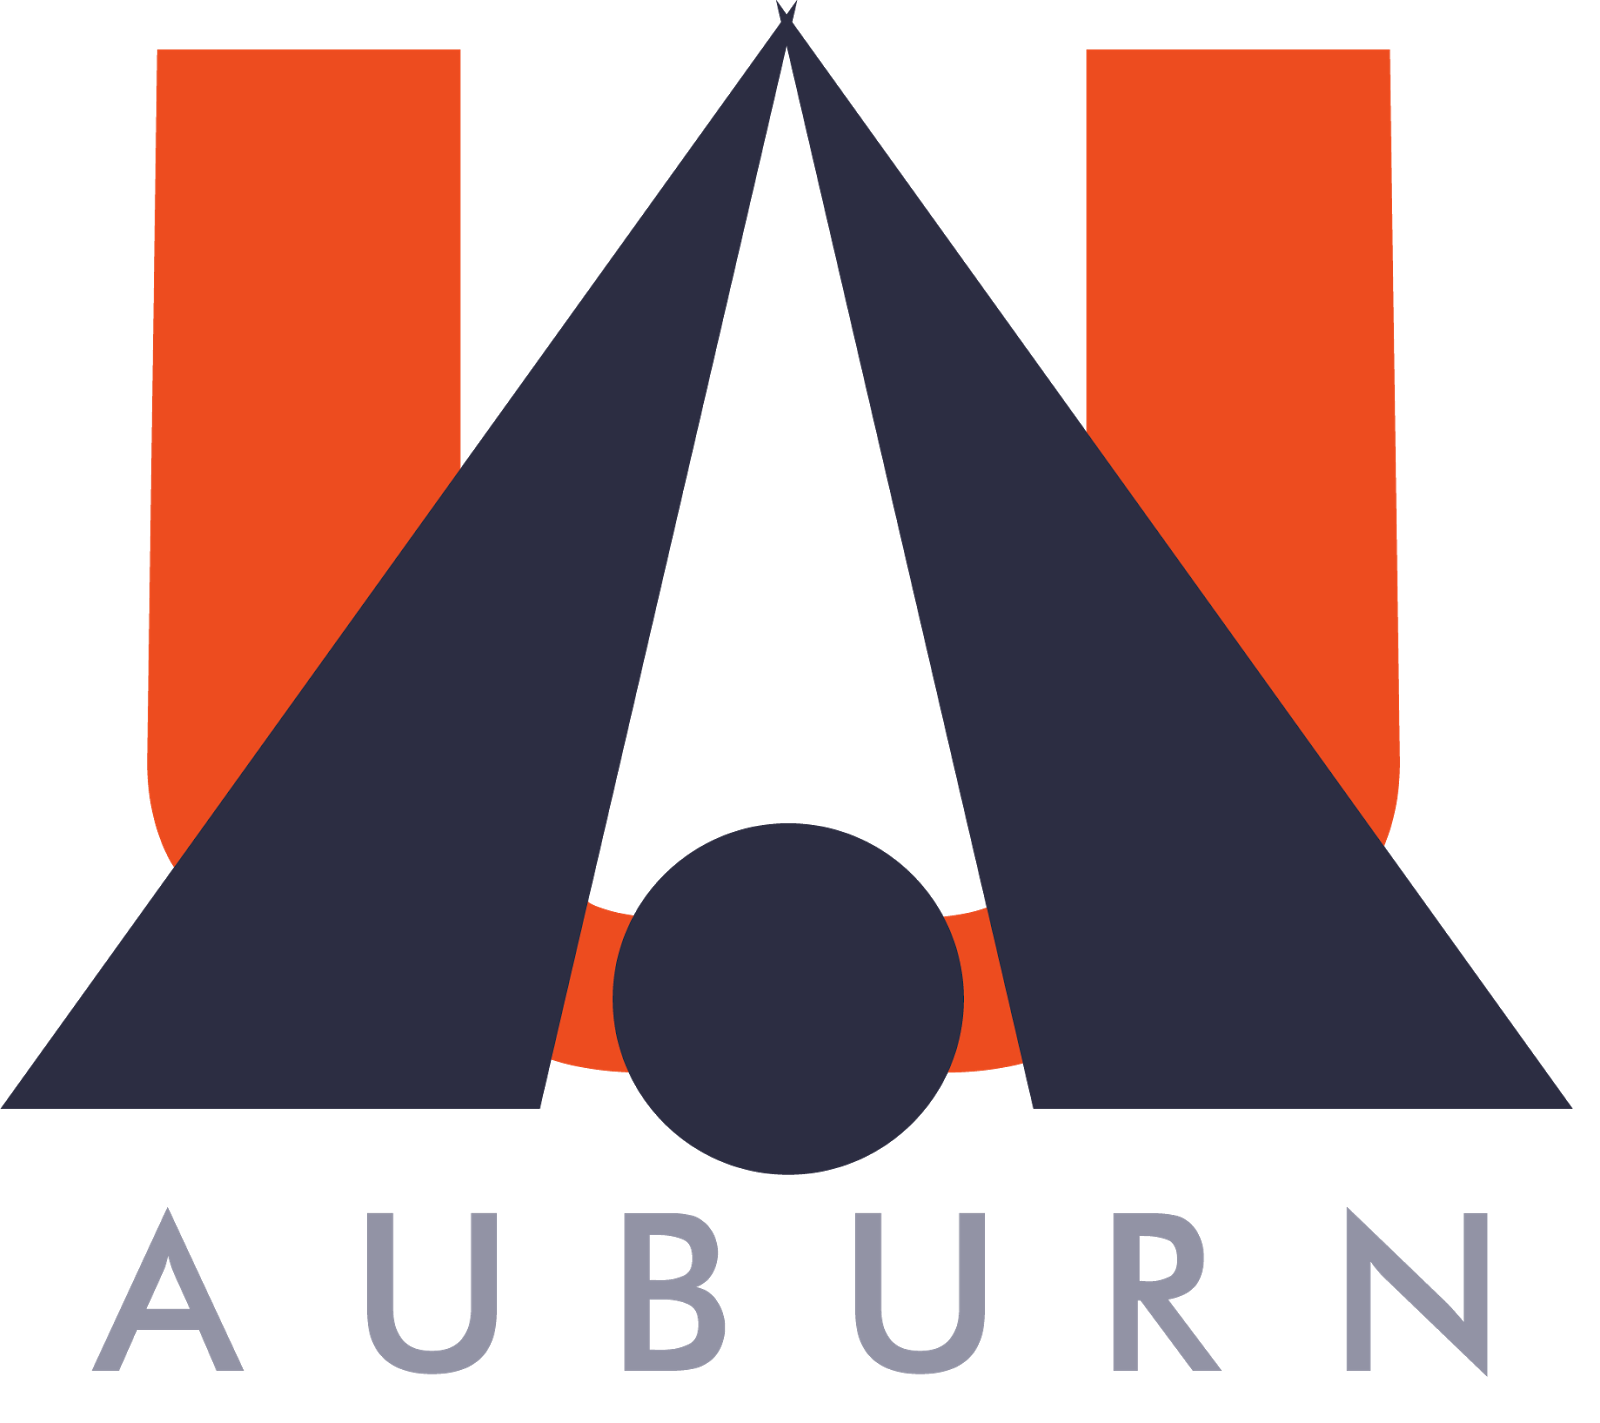 Auburn almost abandoned the AU logo for these? There's 42 different